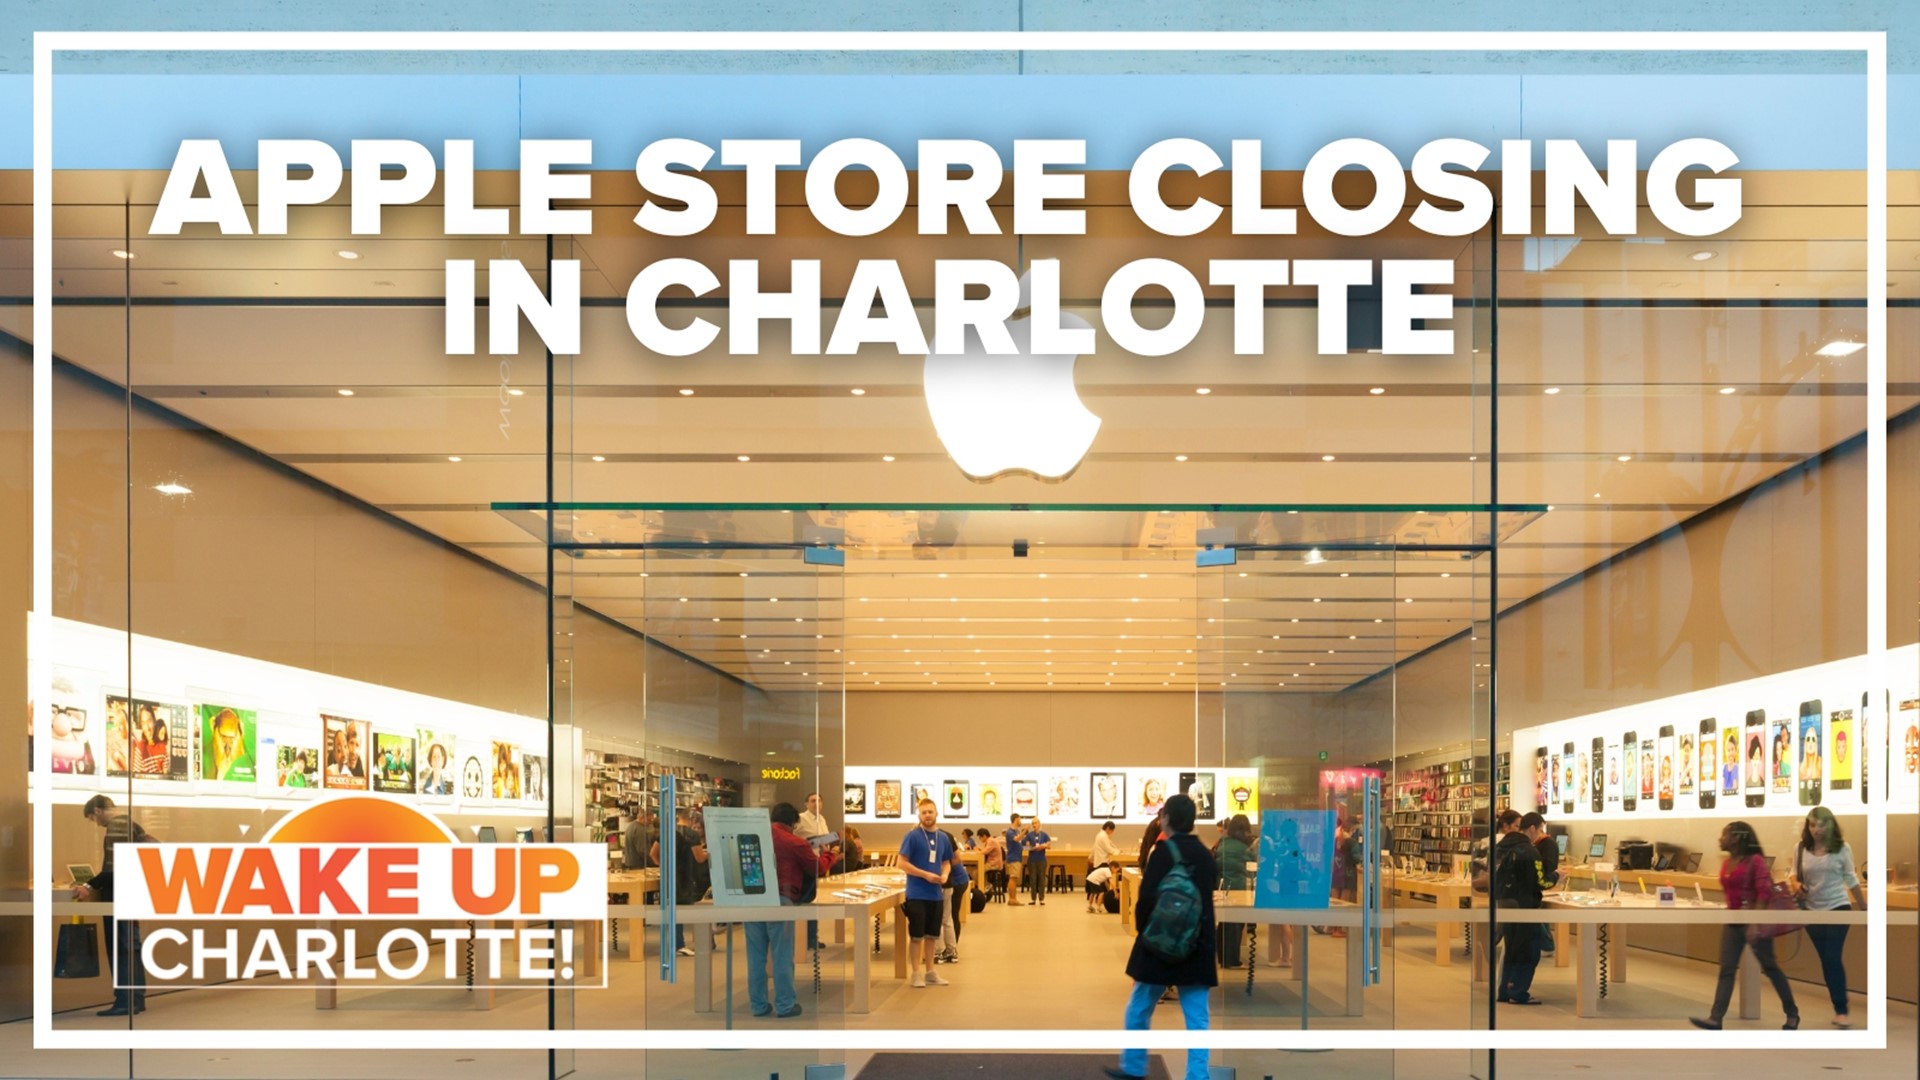 Apple announced the store was closing on Wednesday. It comes one day after shots were fired outside the mall.